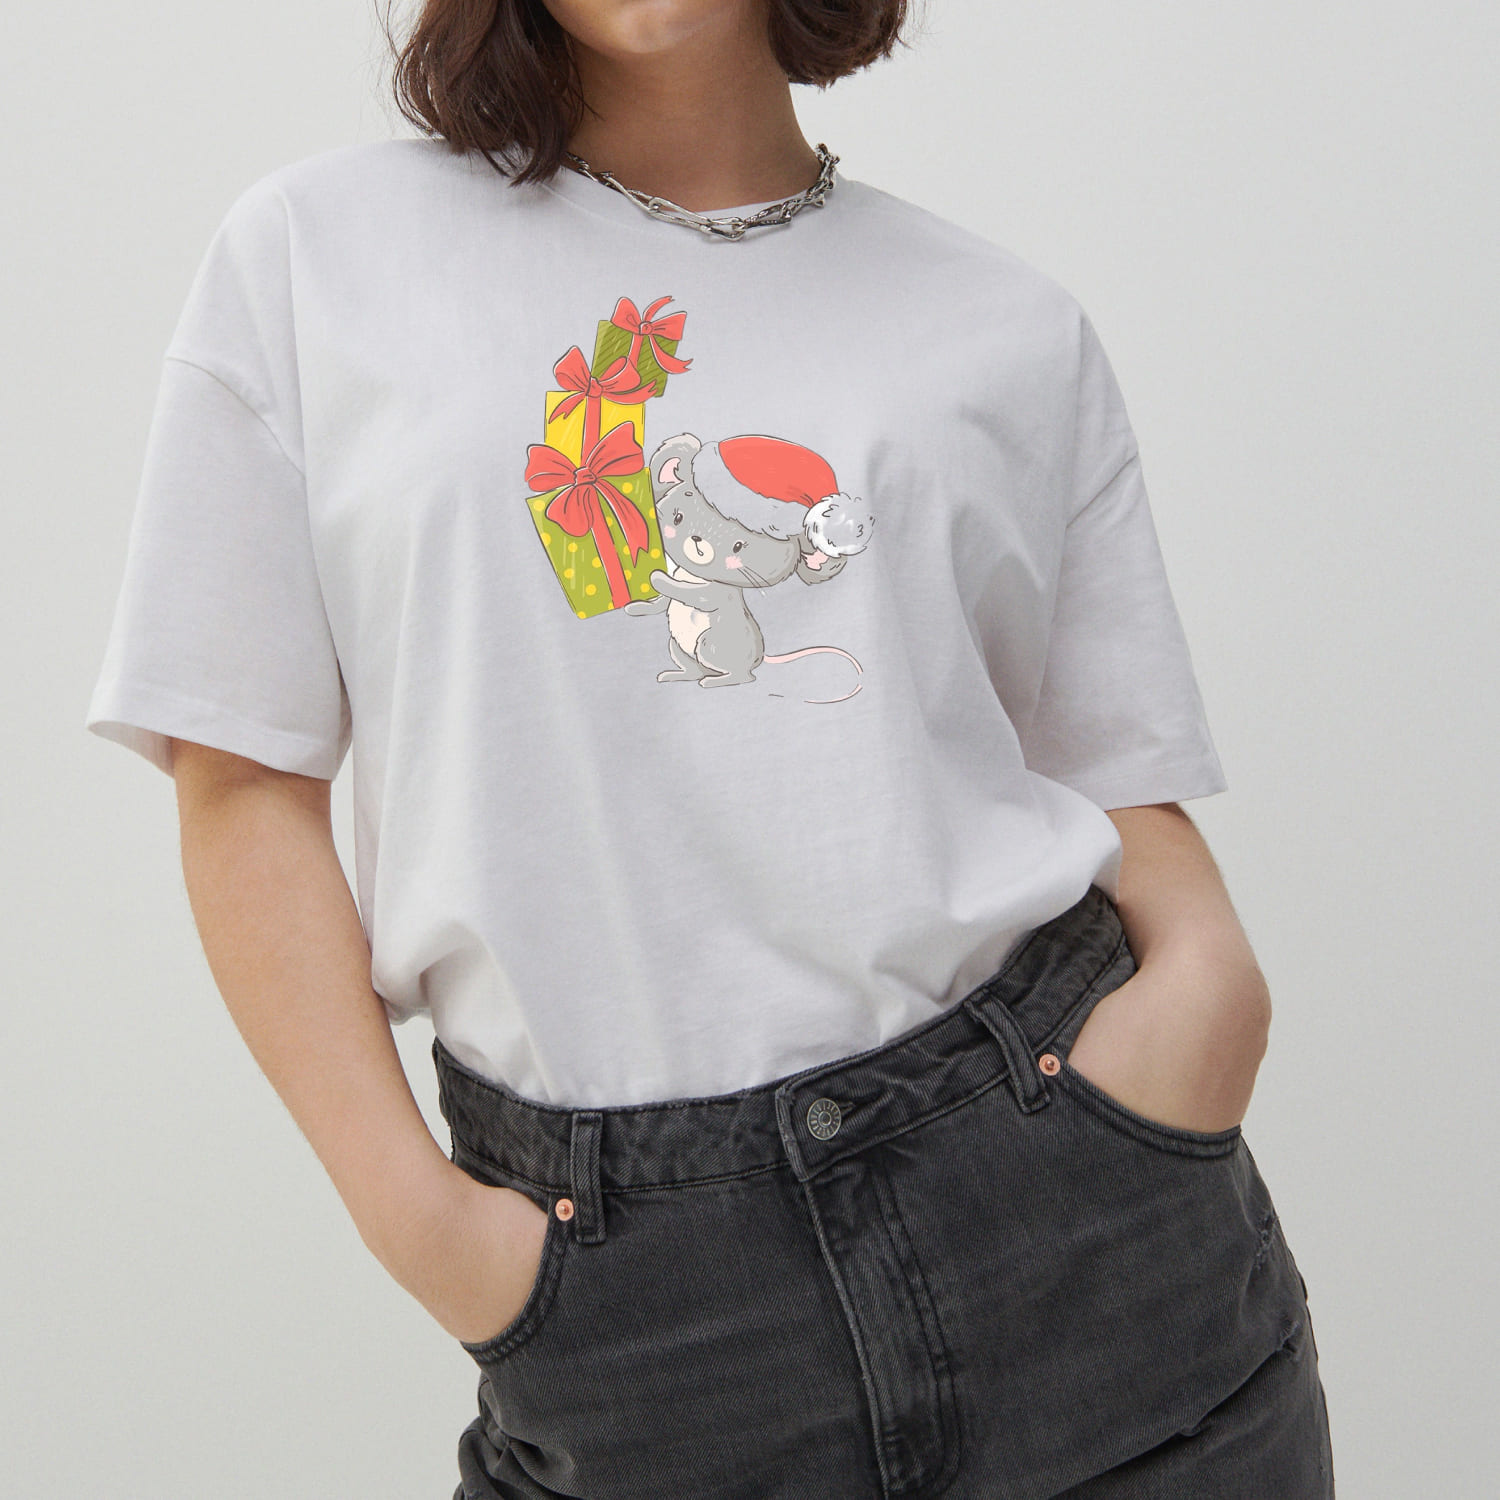 Cute Christmas mice with gift box on t-shirt.